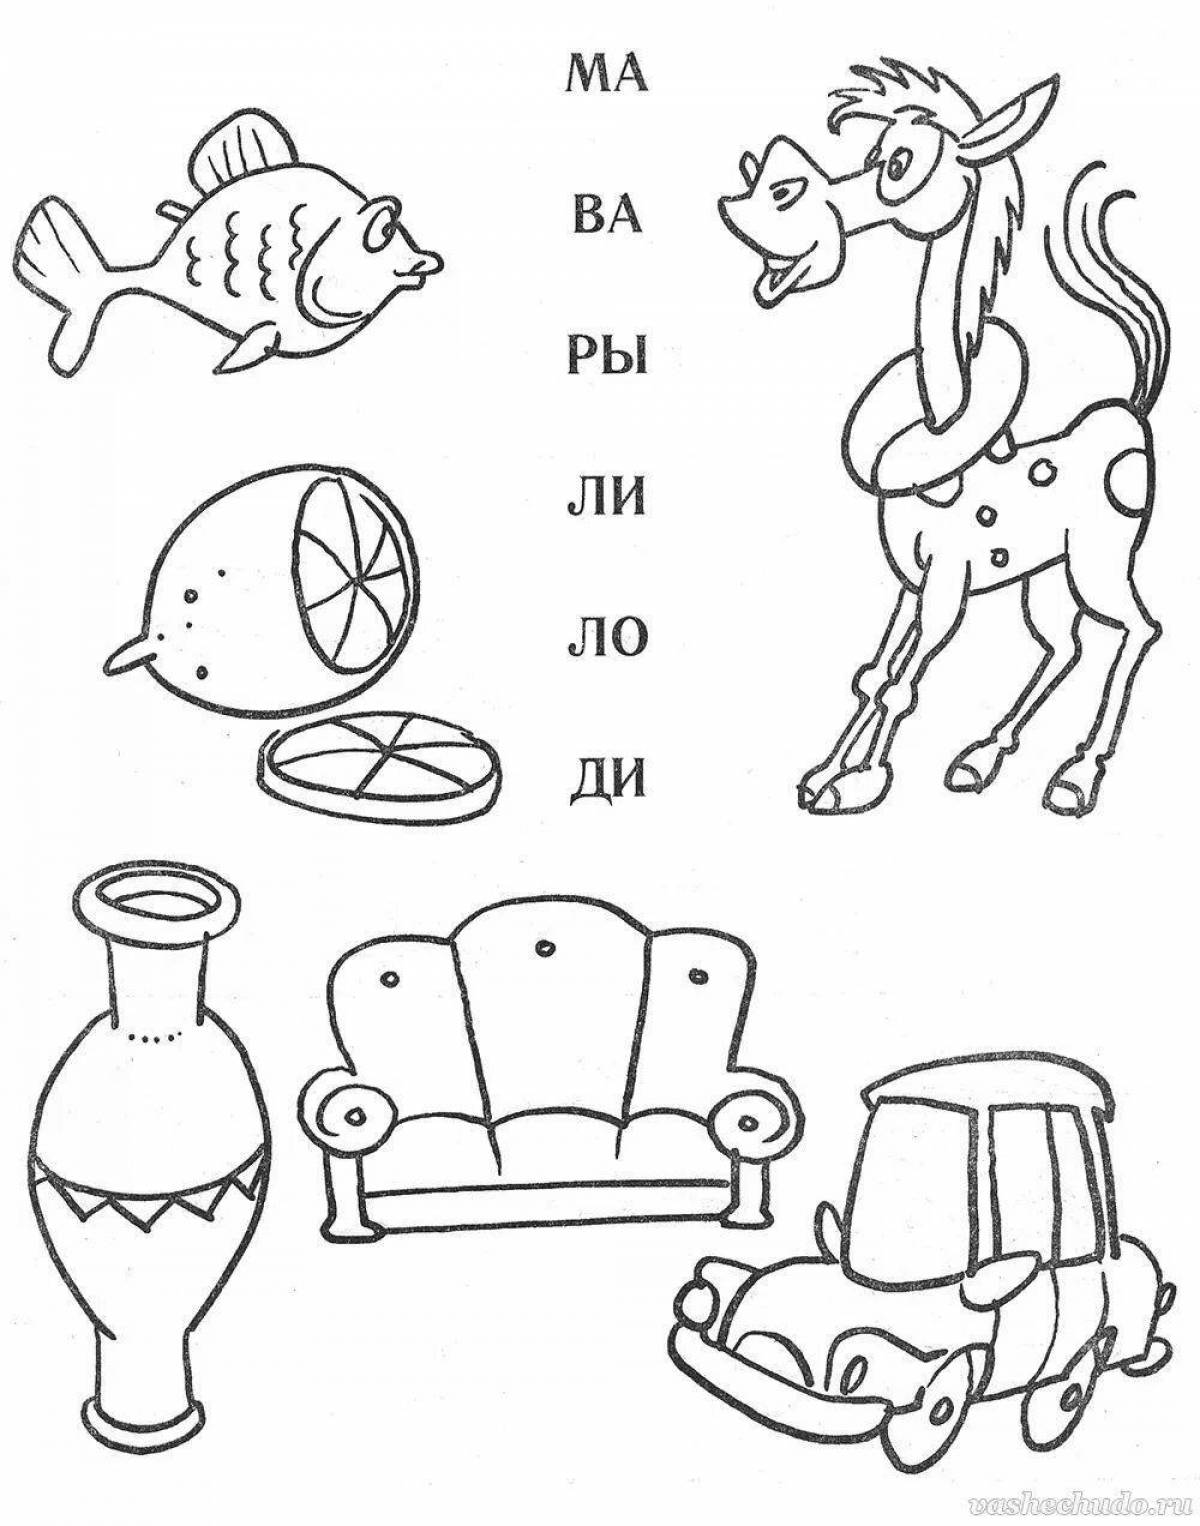 Exciting syllable coloring pages for kids